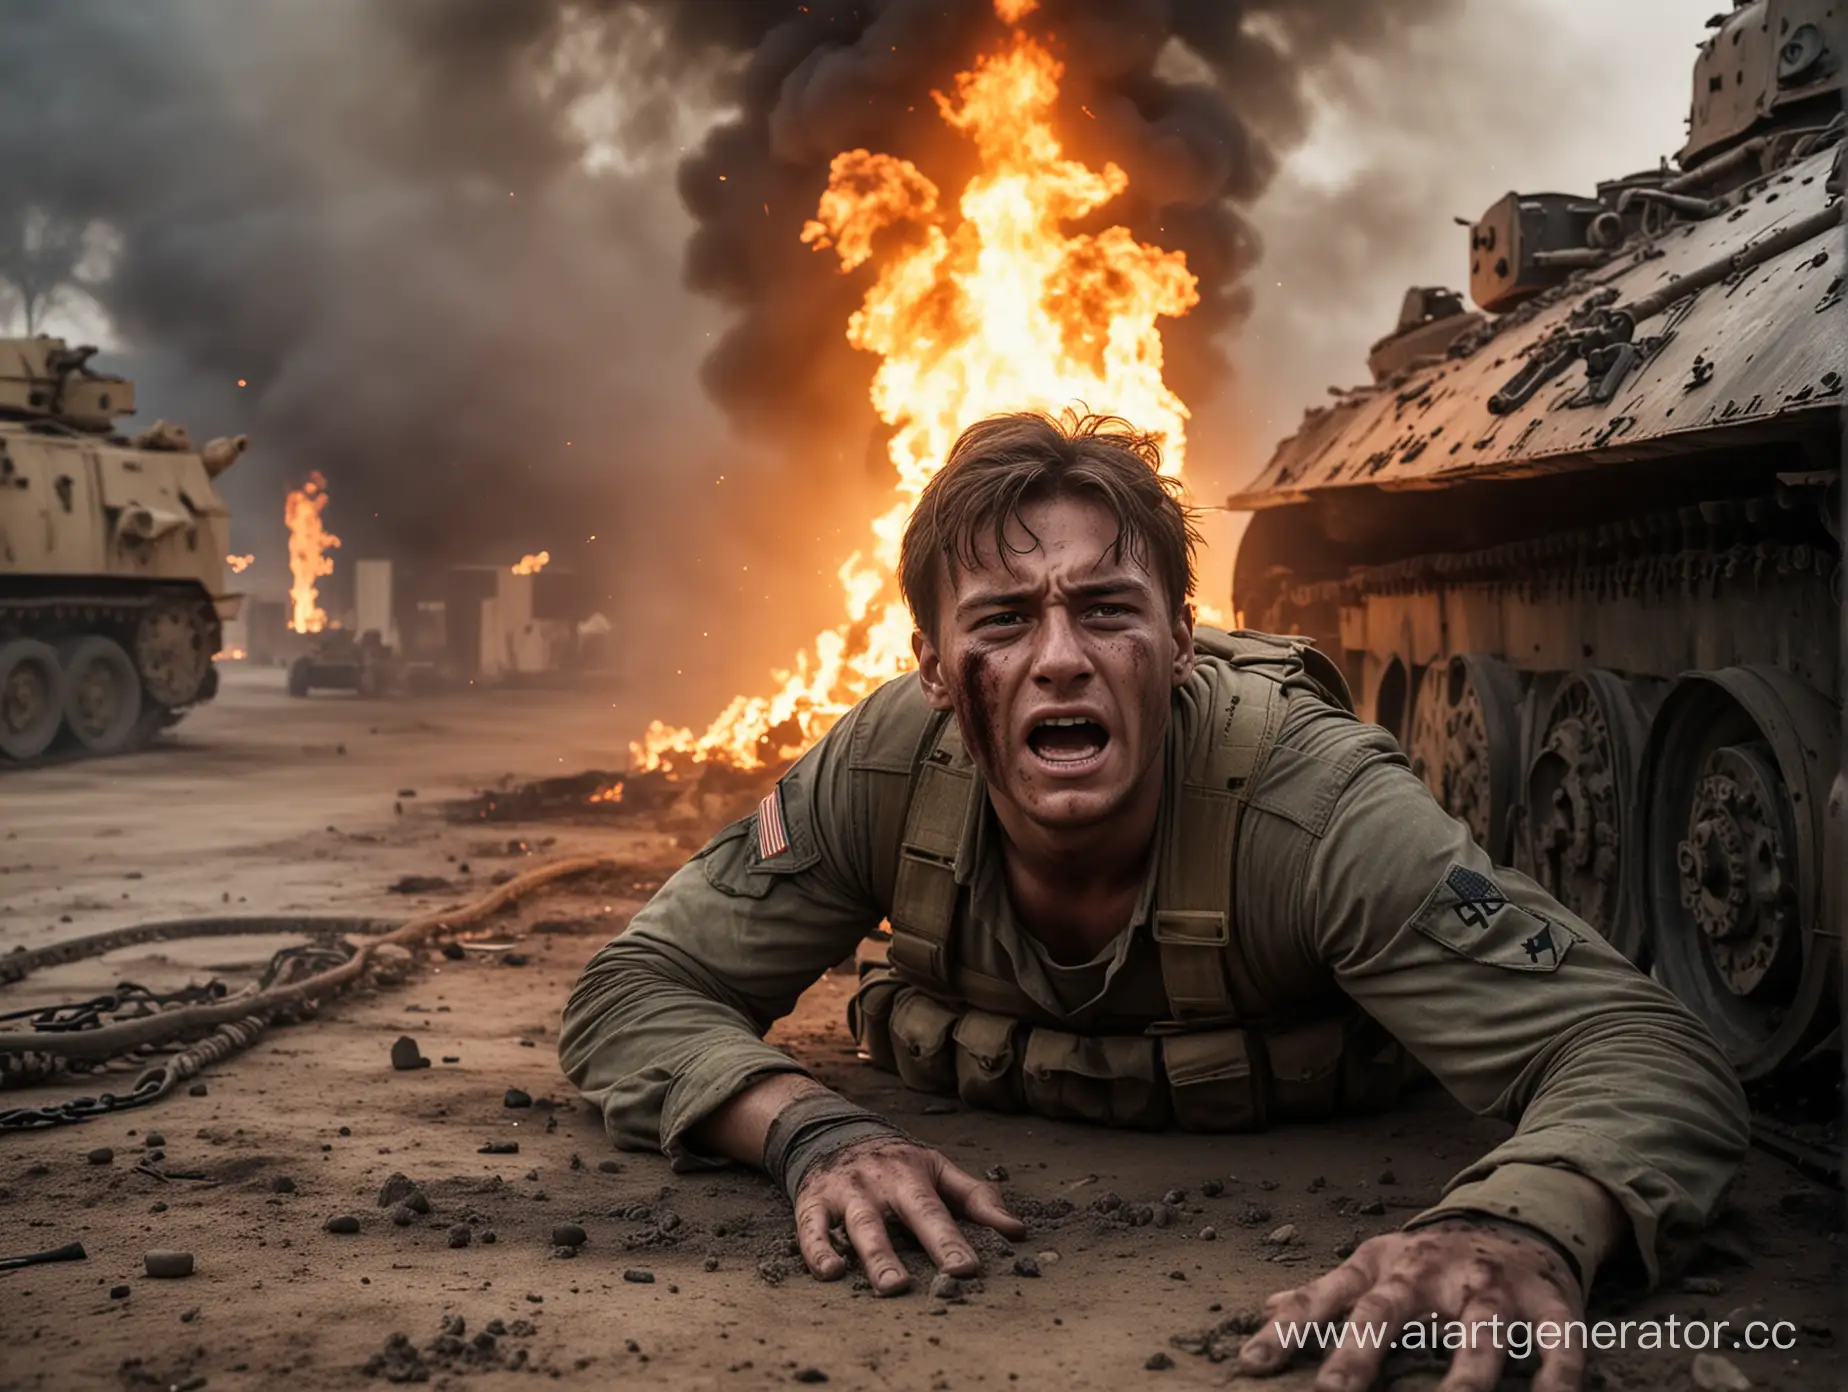 Wounded-Soldier-Struggles-in-Burning-Tank-Amidst-Bitterness